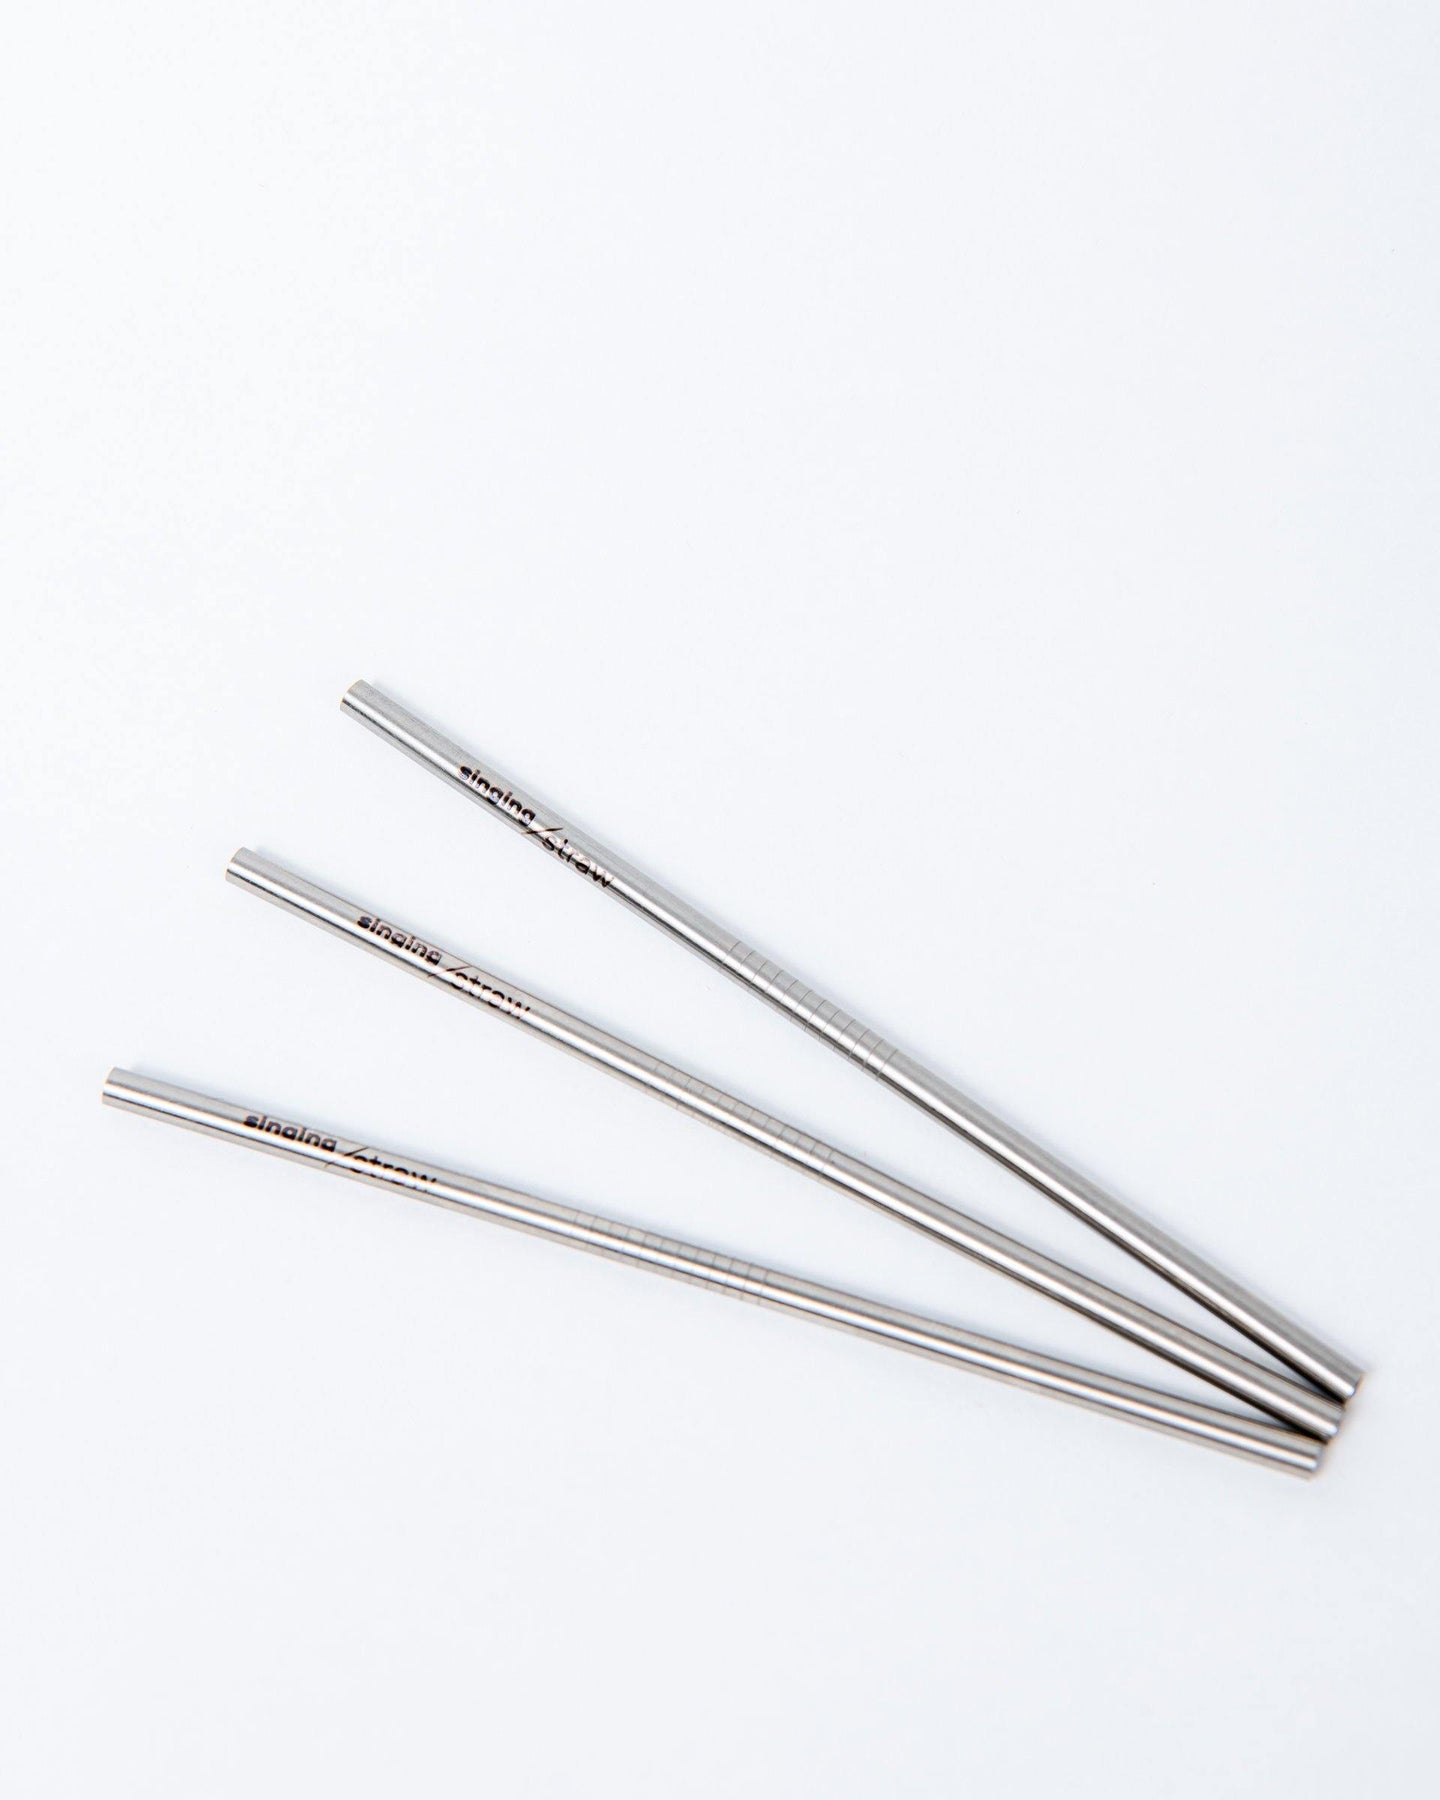 Singing / Straw on Instagram: The Singing / Straw Original comes with  three 3mm straws, allowing singers to use 1, 2, or 3 at a time for variety  in resistance. This set